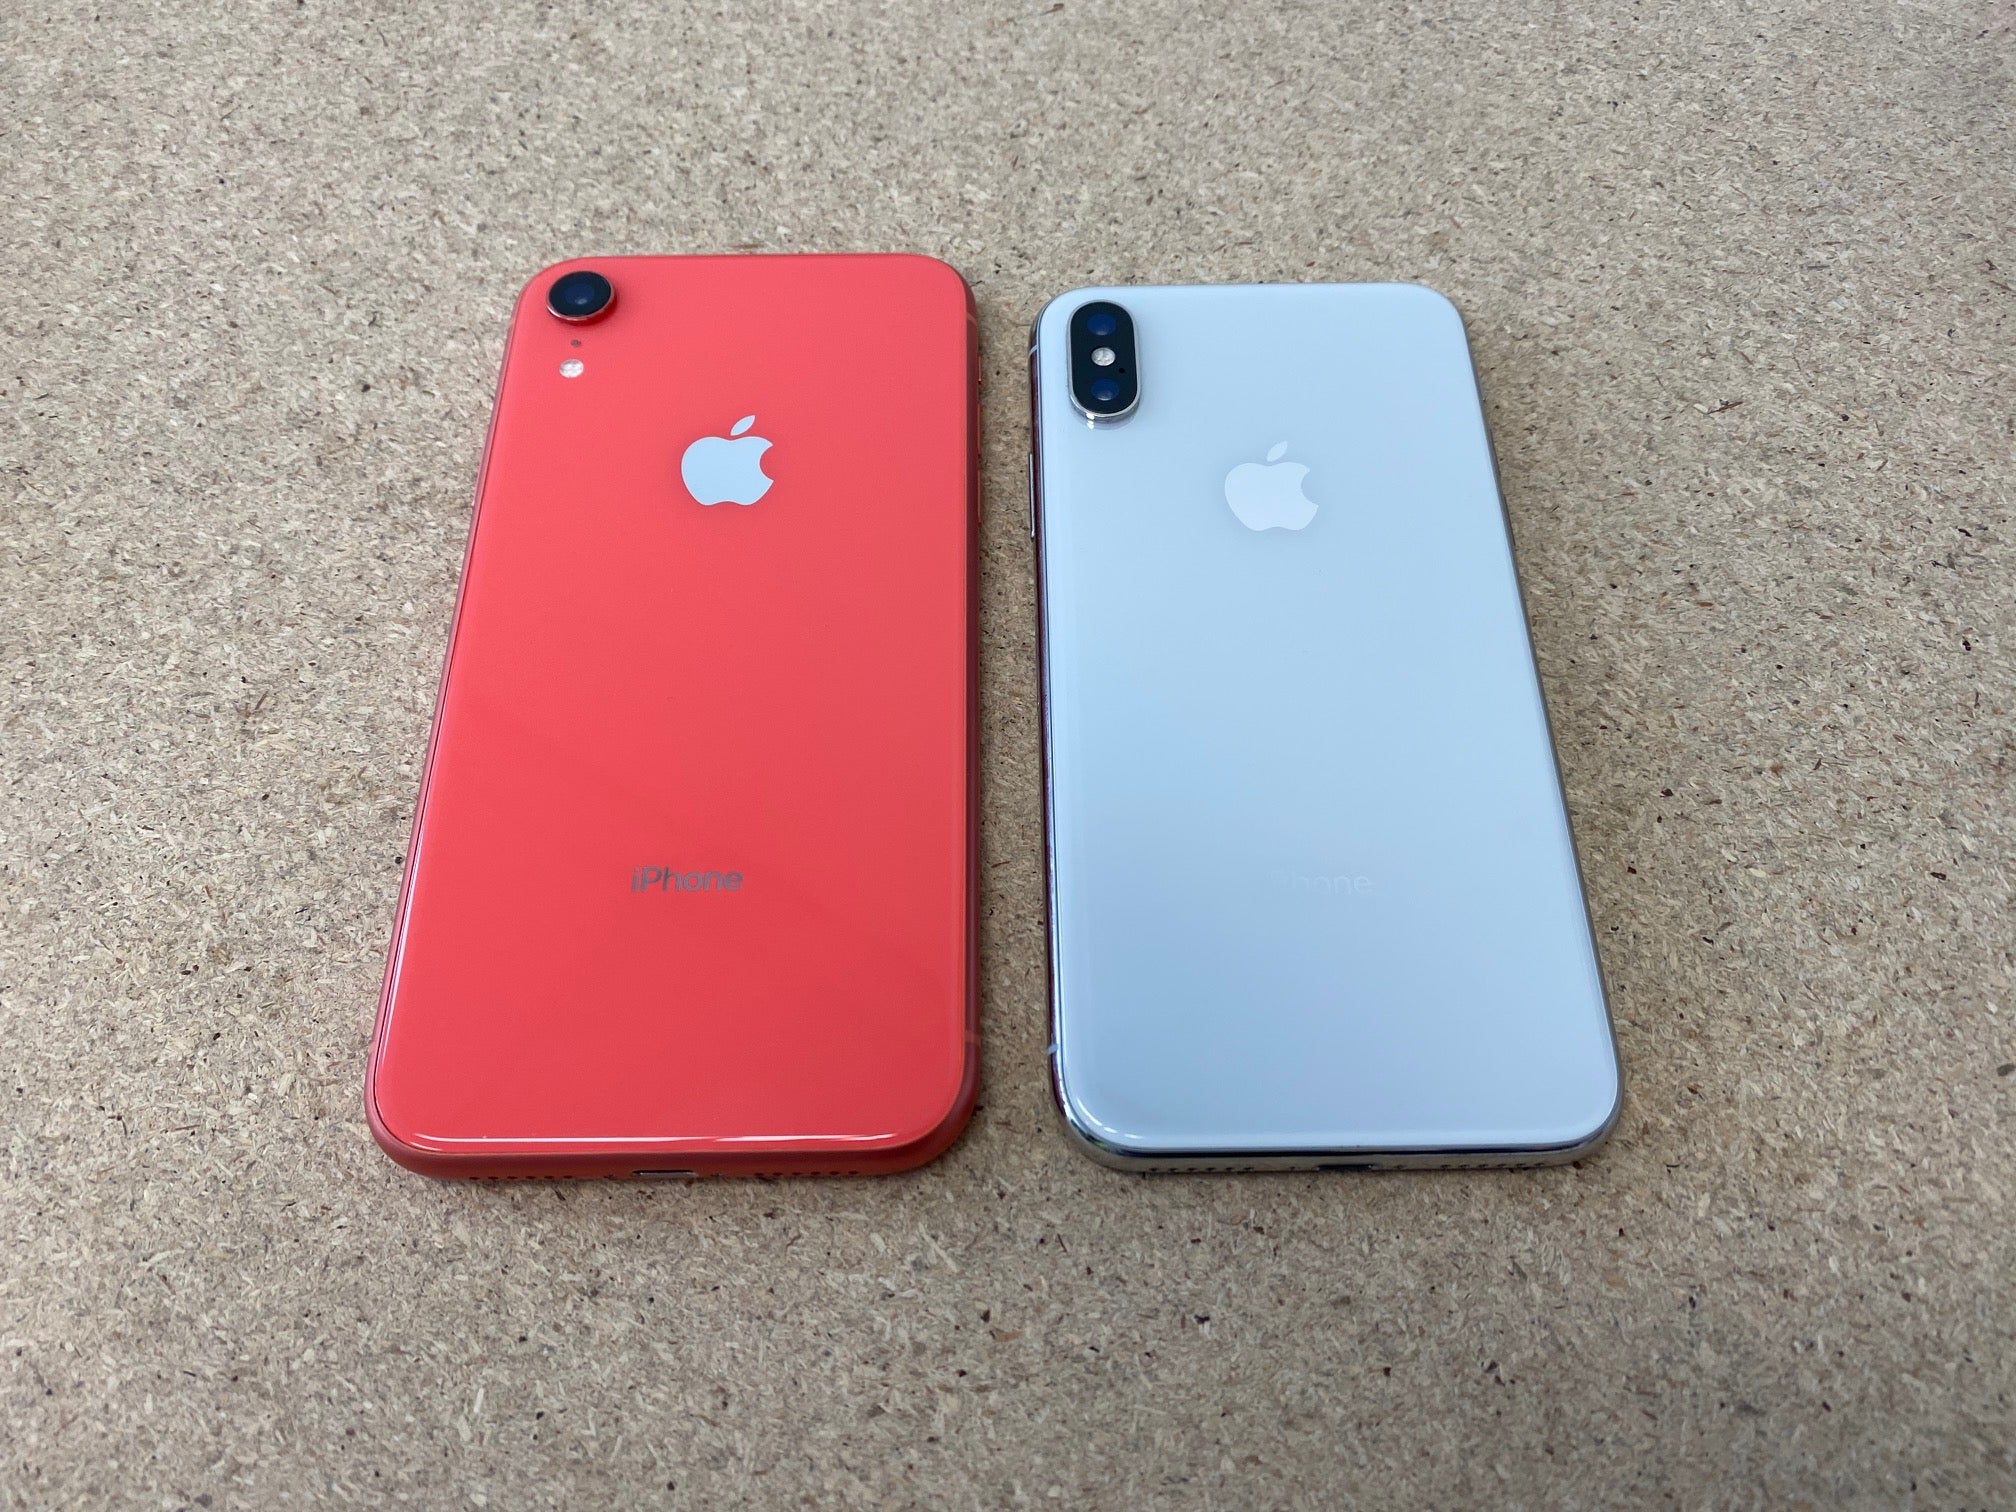 What's the difference between the iPhone X and iPhone XR? – Frank Mobile